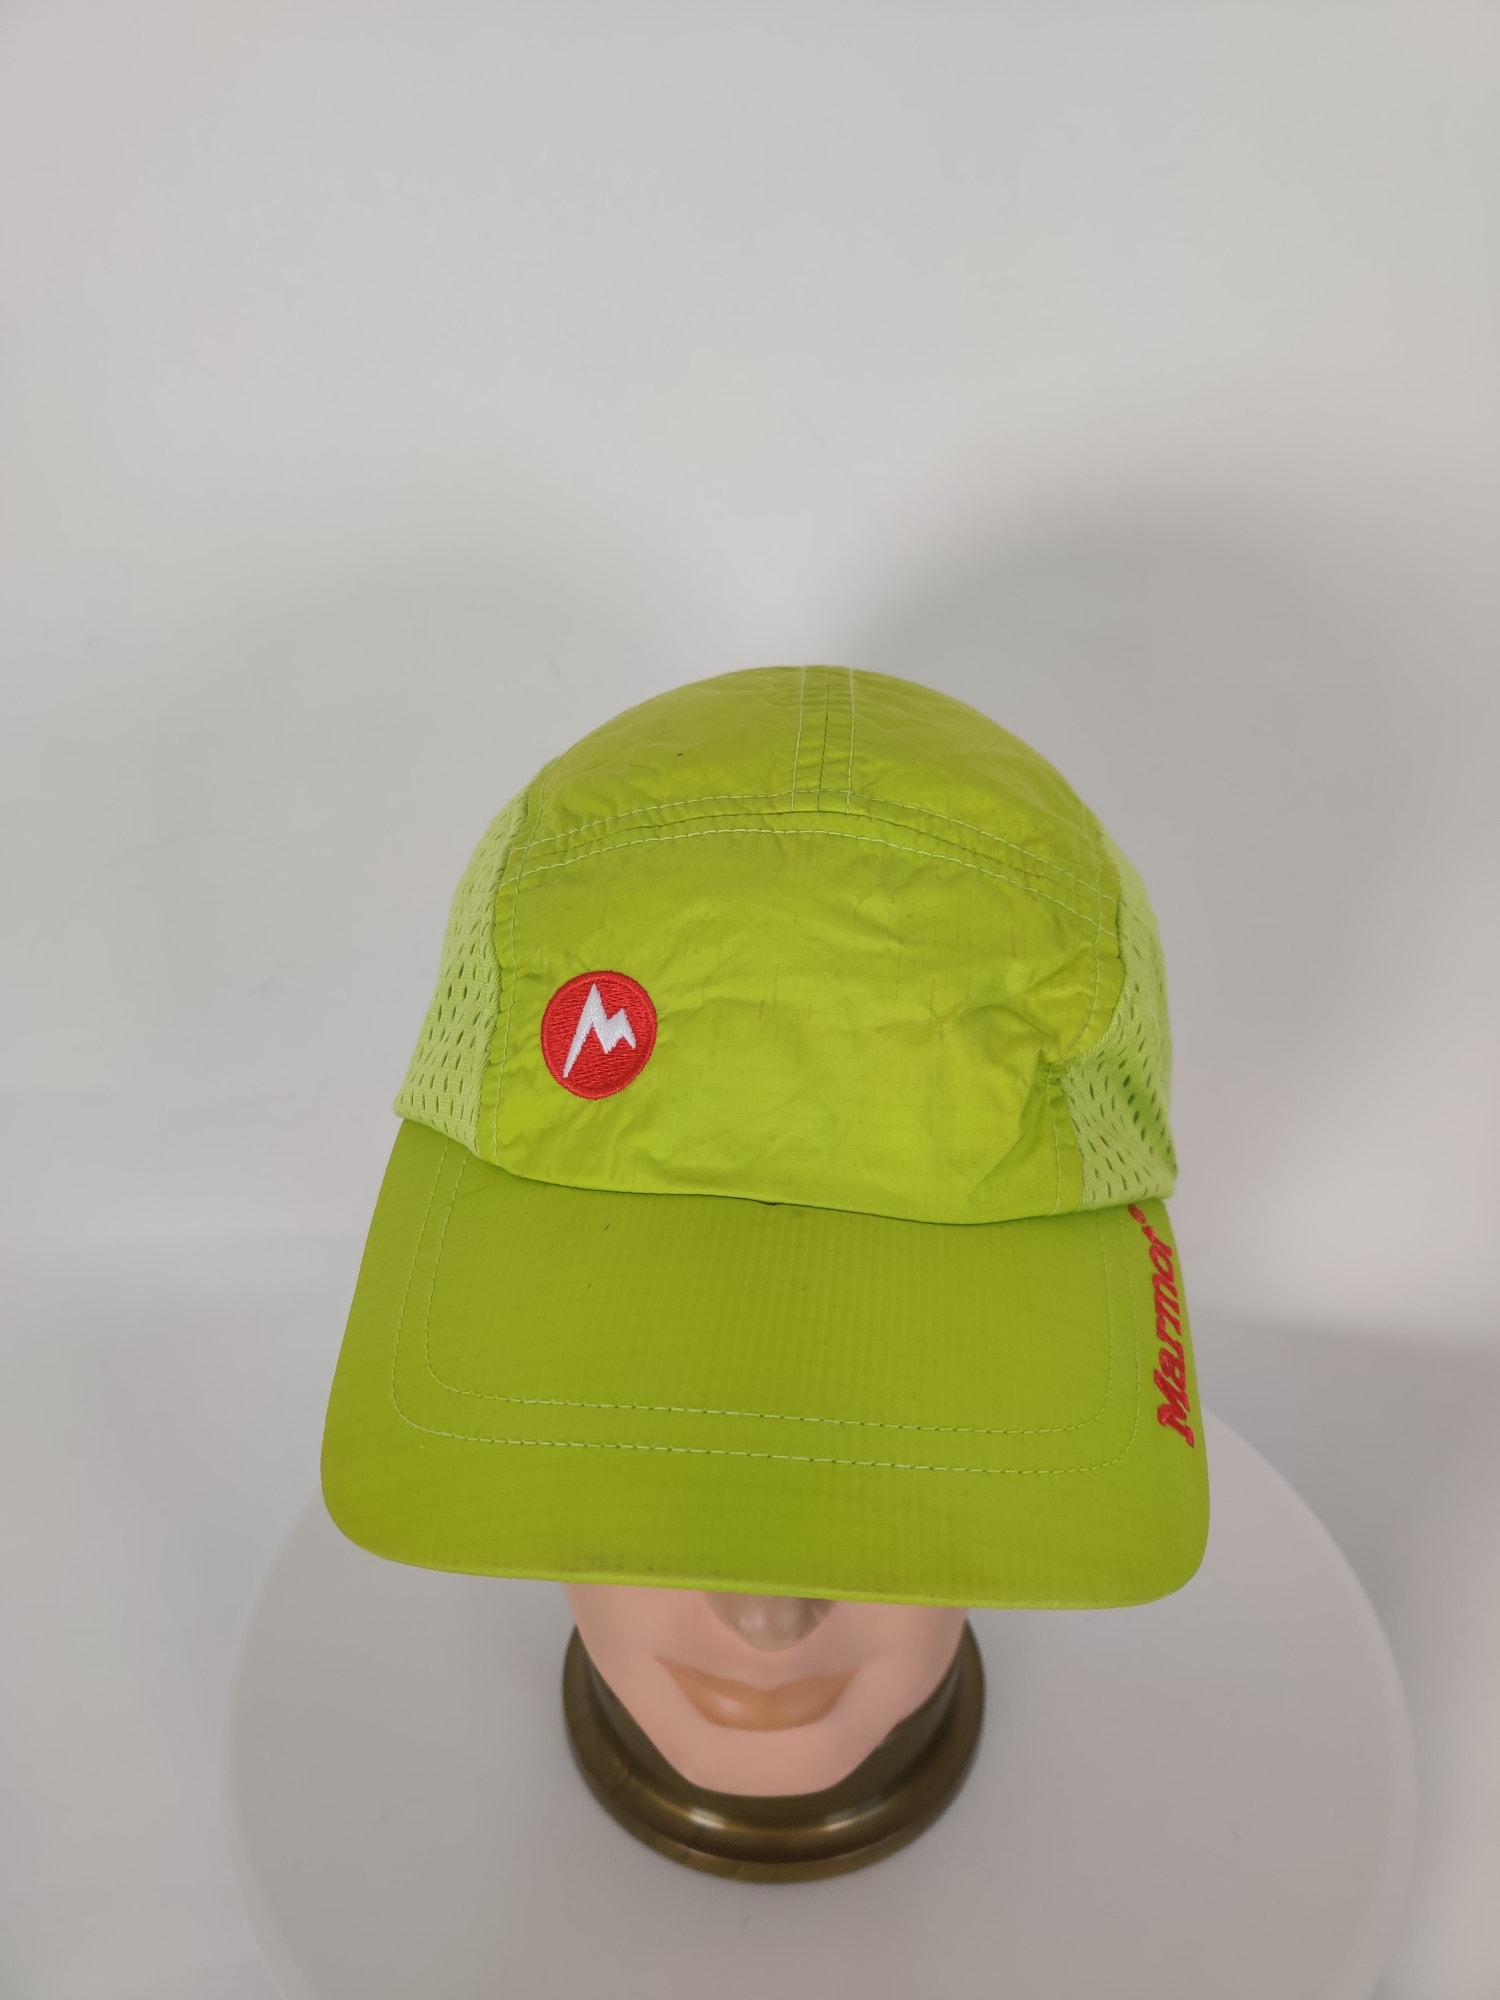 (V) Marmot Unisex cycling hat hiking casual lightweight adjustable green OS  - Picture 1 of 8